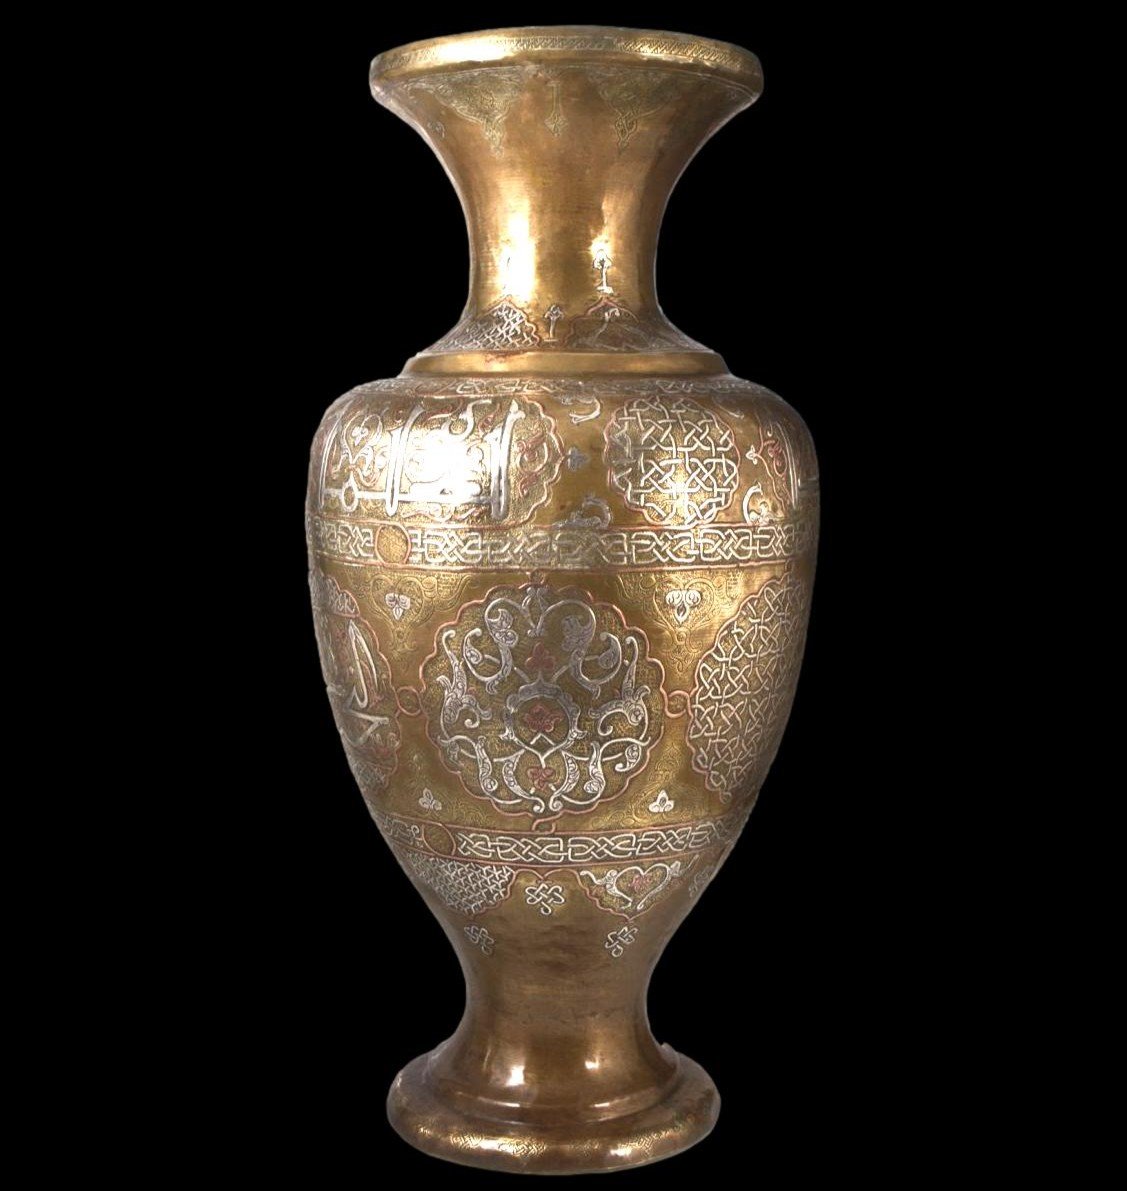 Important Baluster Vase In Brass Damascened With Silver, Syrian Art Of The 19th Century, Superb Condition